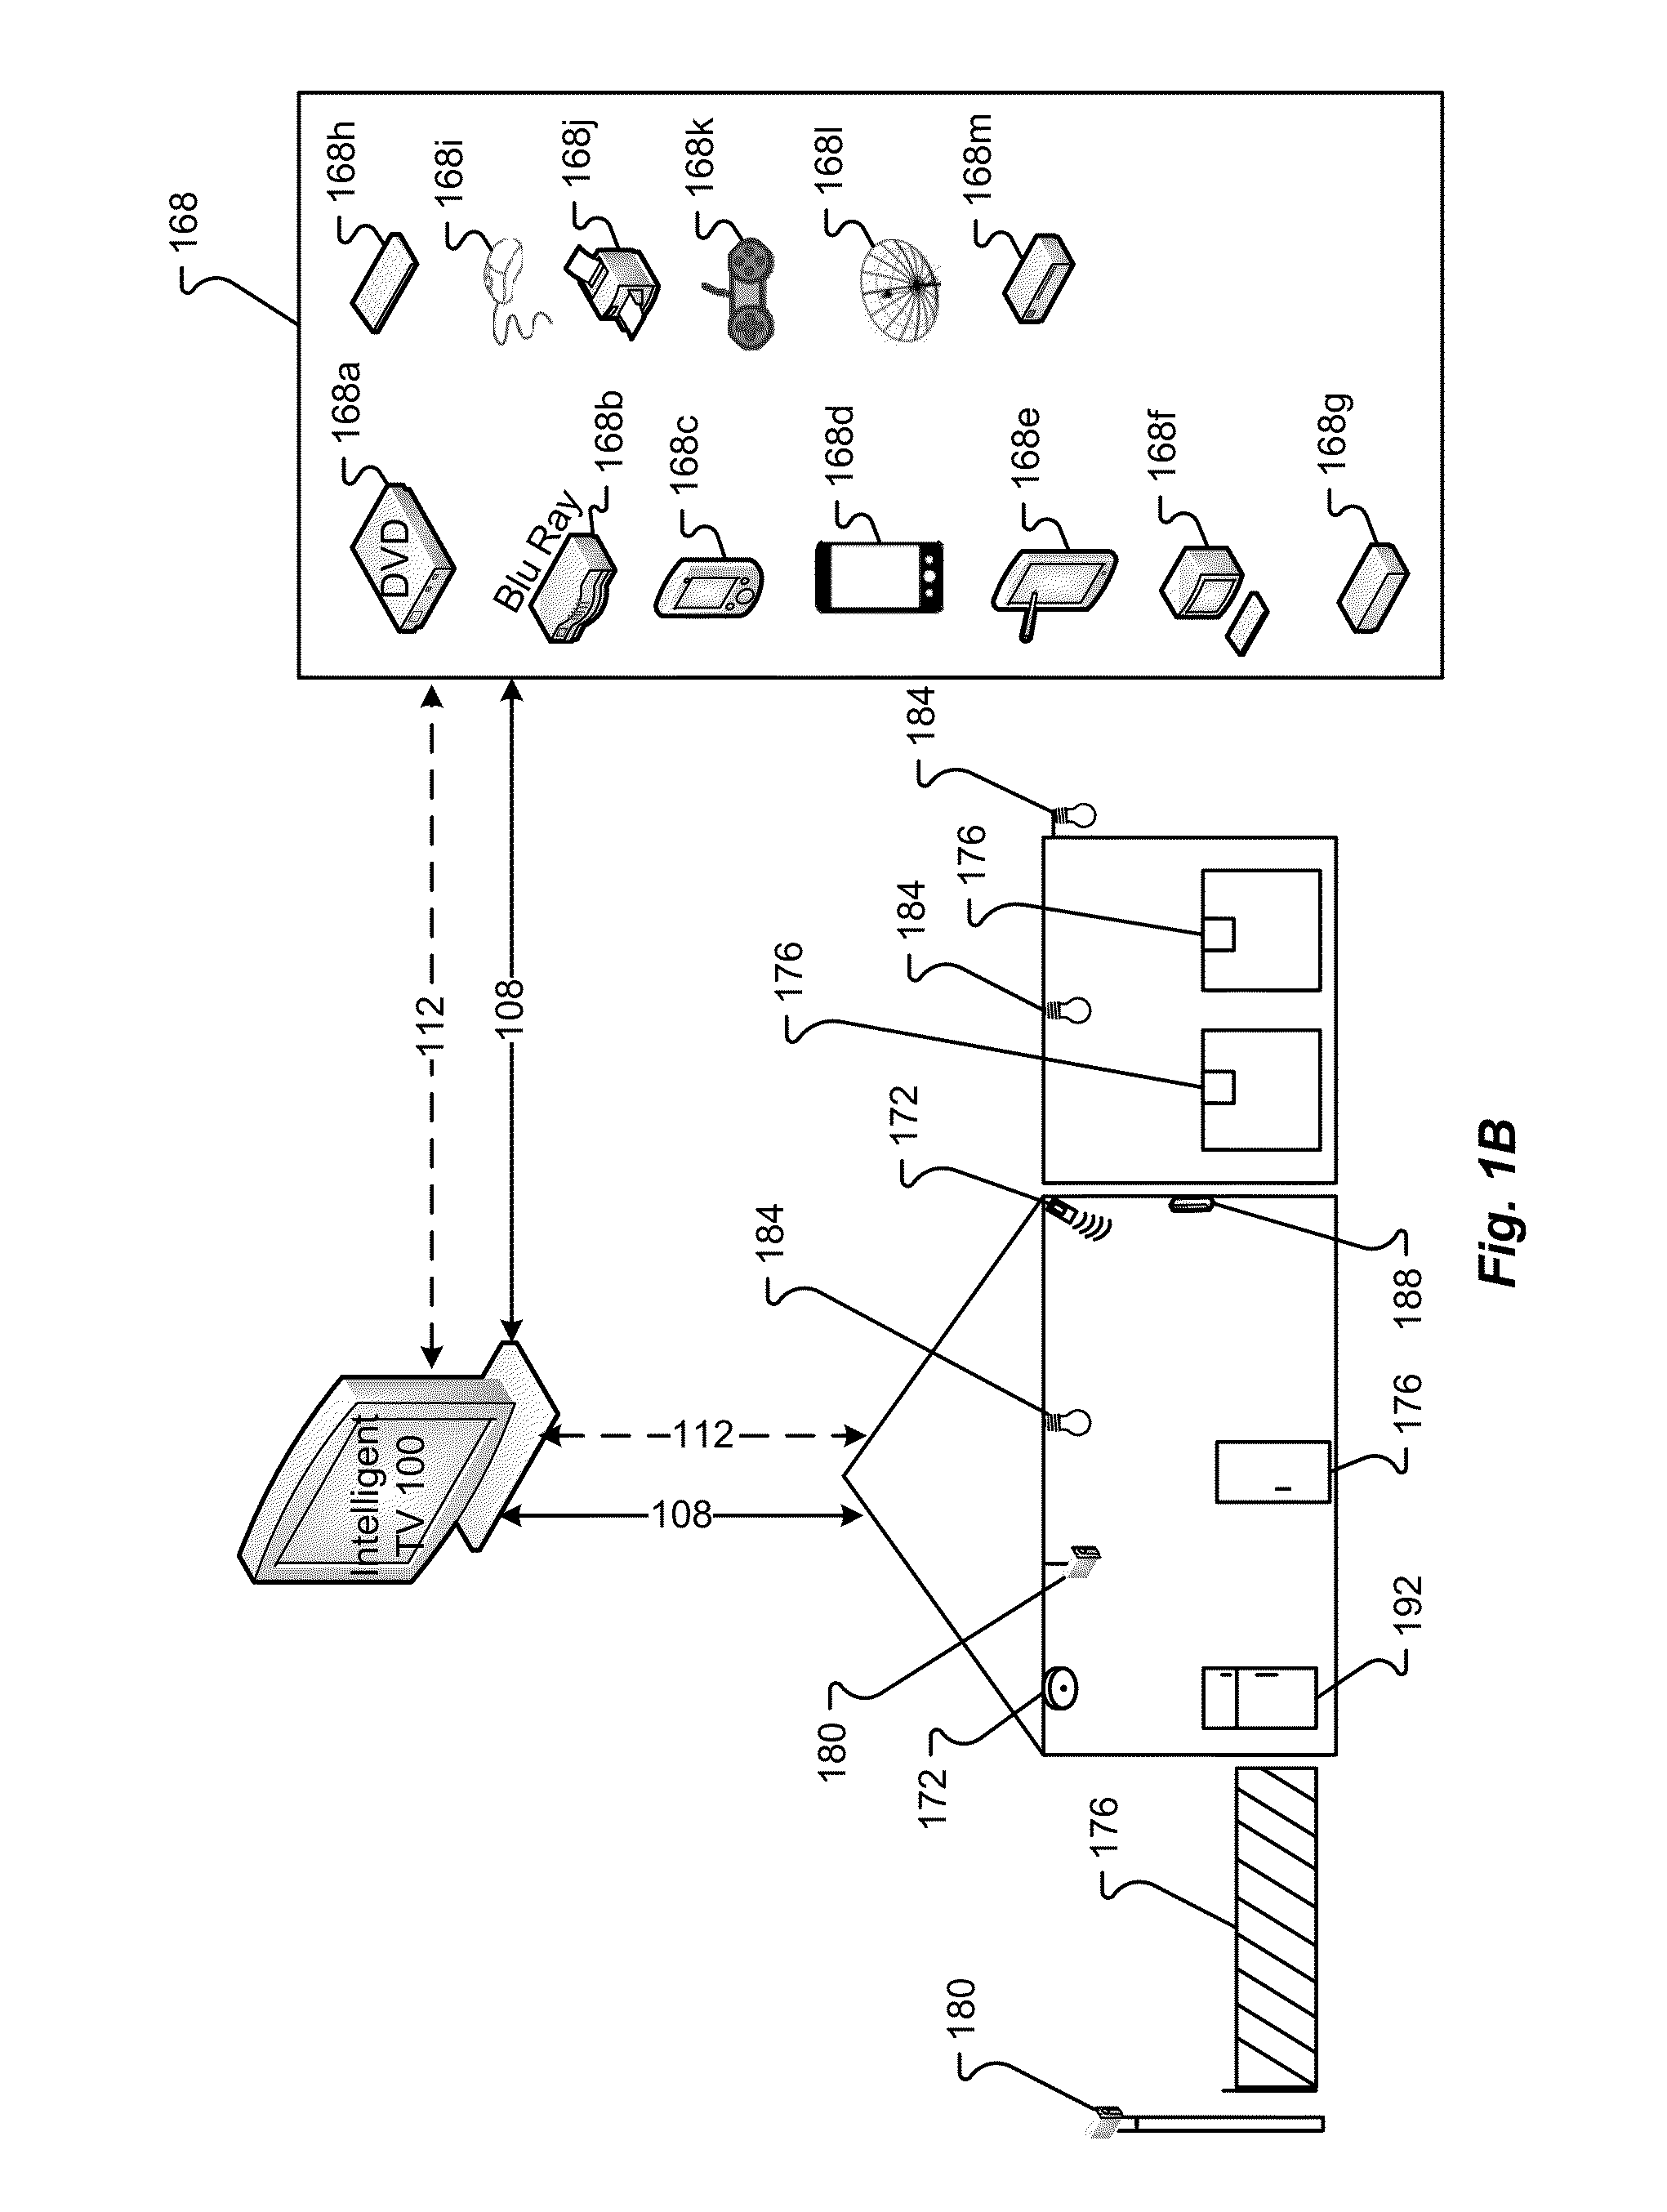 Systems and methods for providing user interfaces in an intelligent television